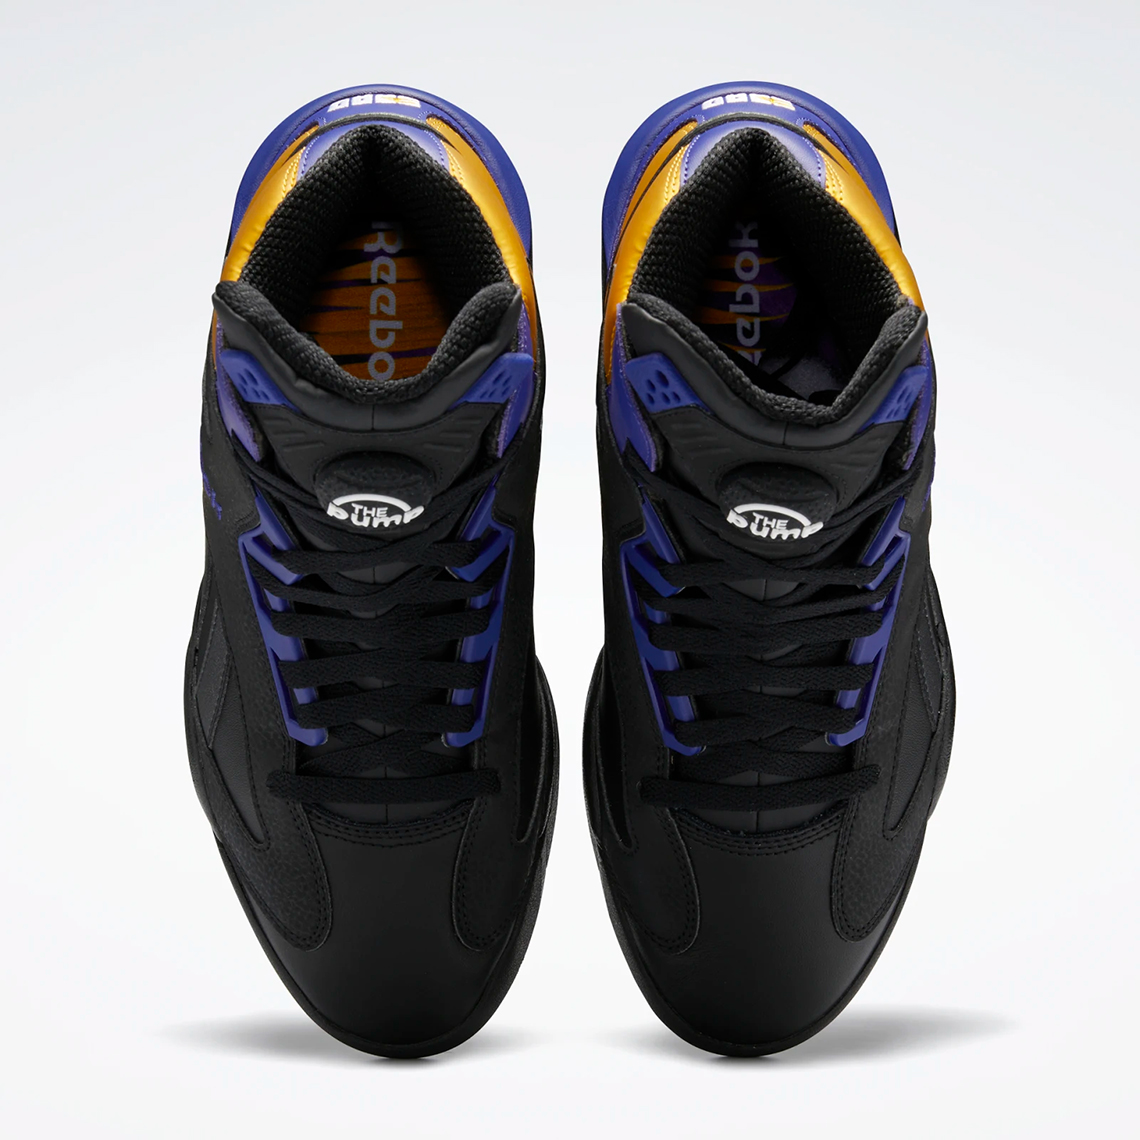 Reebok Mallas has announced a new collection in collaboration with NFL Houston Texans player JJ Watt Lakers Gy7127 7